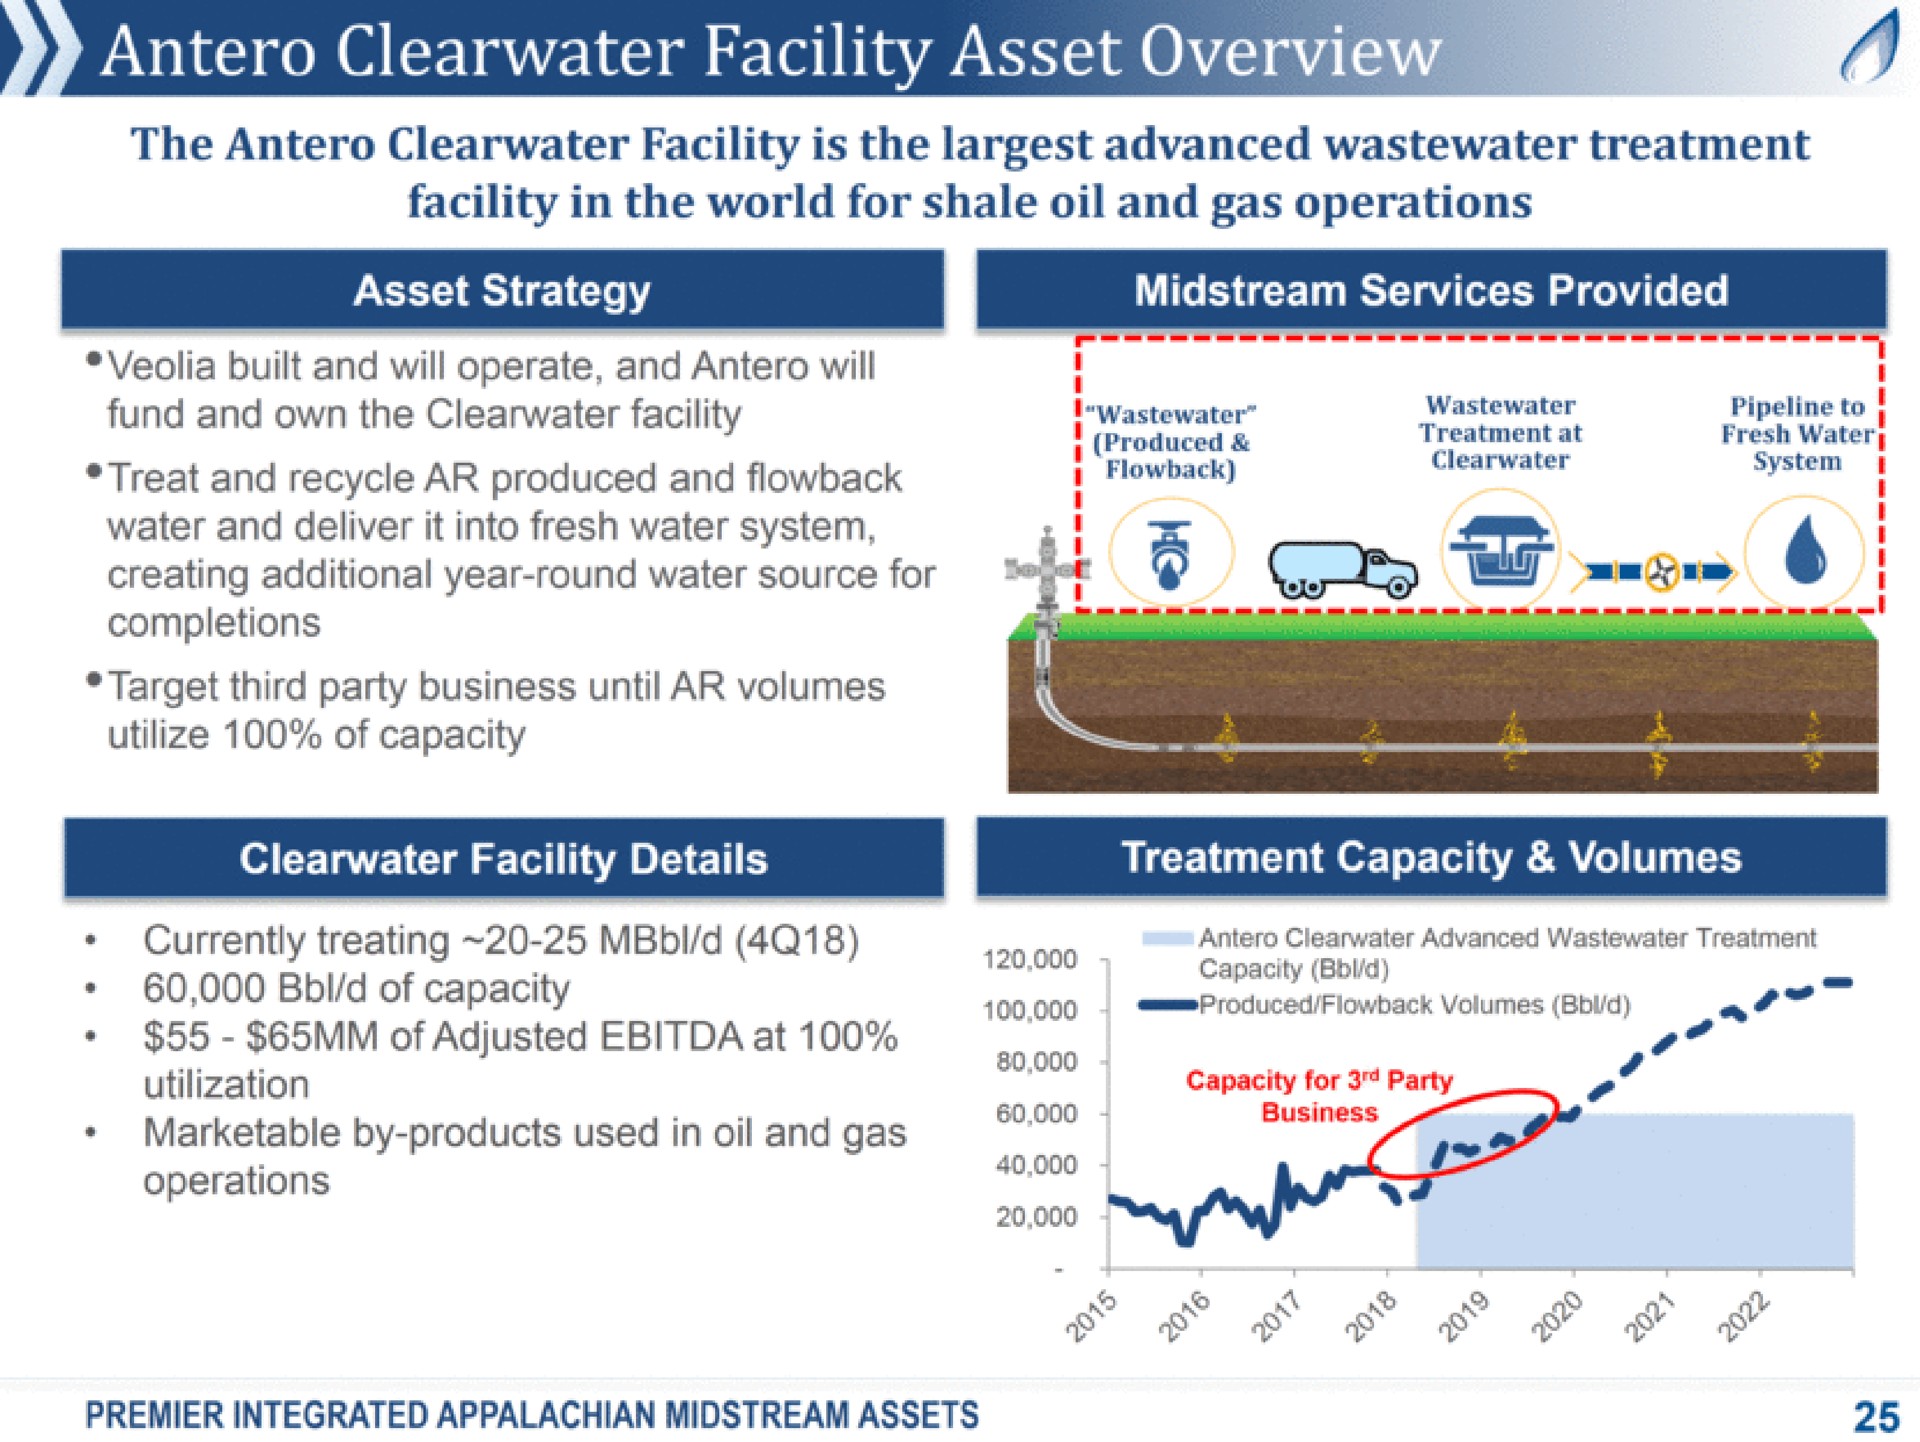 facility asset overview the facility is the advanced treatment facility in the world for shale oil and gas operations asset strategy midstream ahead built and will operate and will fund and own the facility treat and recycle produced and water and deliver it into fresh water system creating additional year round water source for completions target third party business until volumes utilize of capacity facility details currently treating of capacity of adjusted at utilization marketable by products used in oil and gas operations i i pipeline to fresh water system a me we treatment capacity volumes i i advanced treatment capacity produced volumes so for party anna premier integrated midstream assets | Antero Midstream Partners